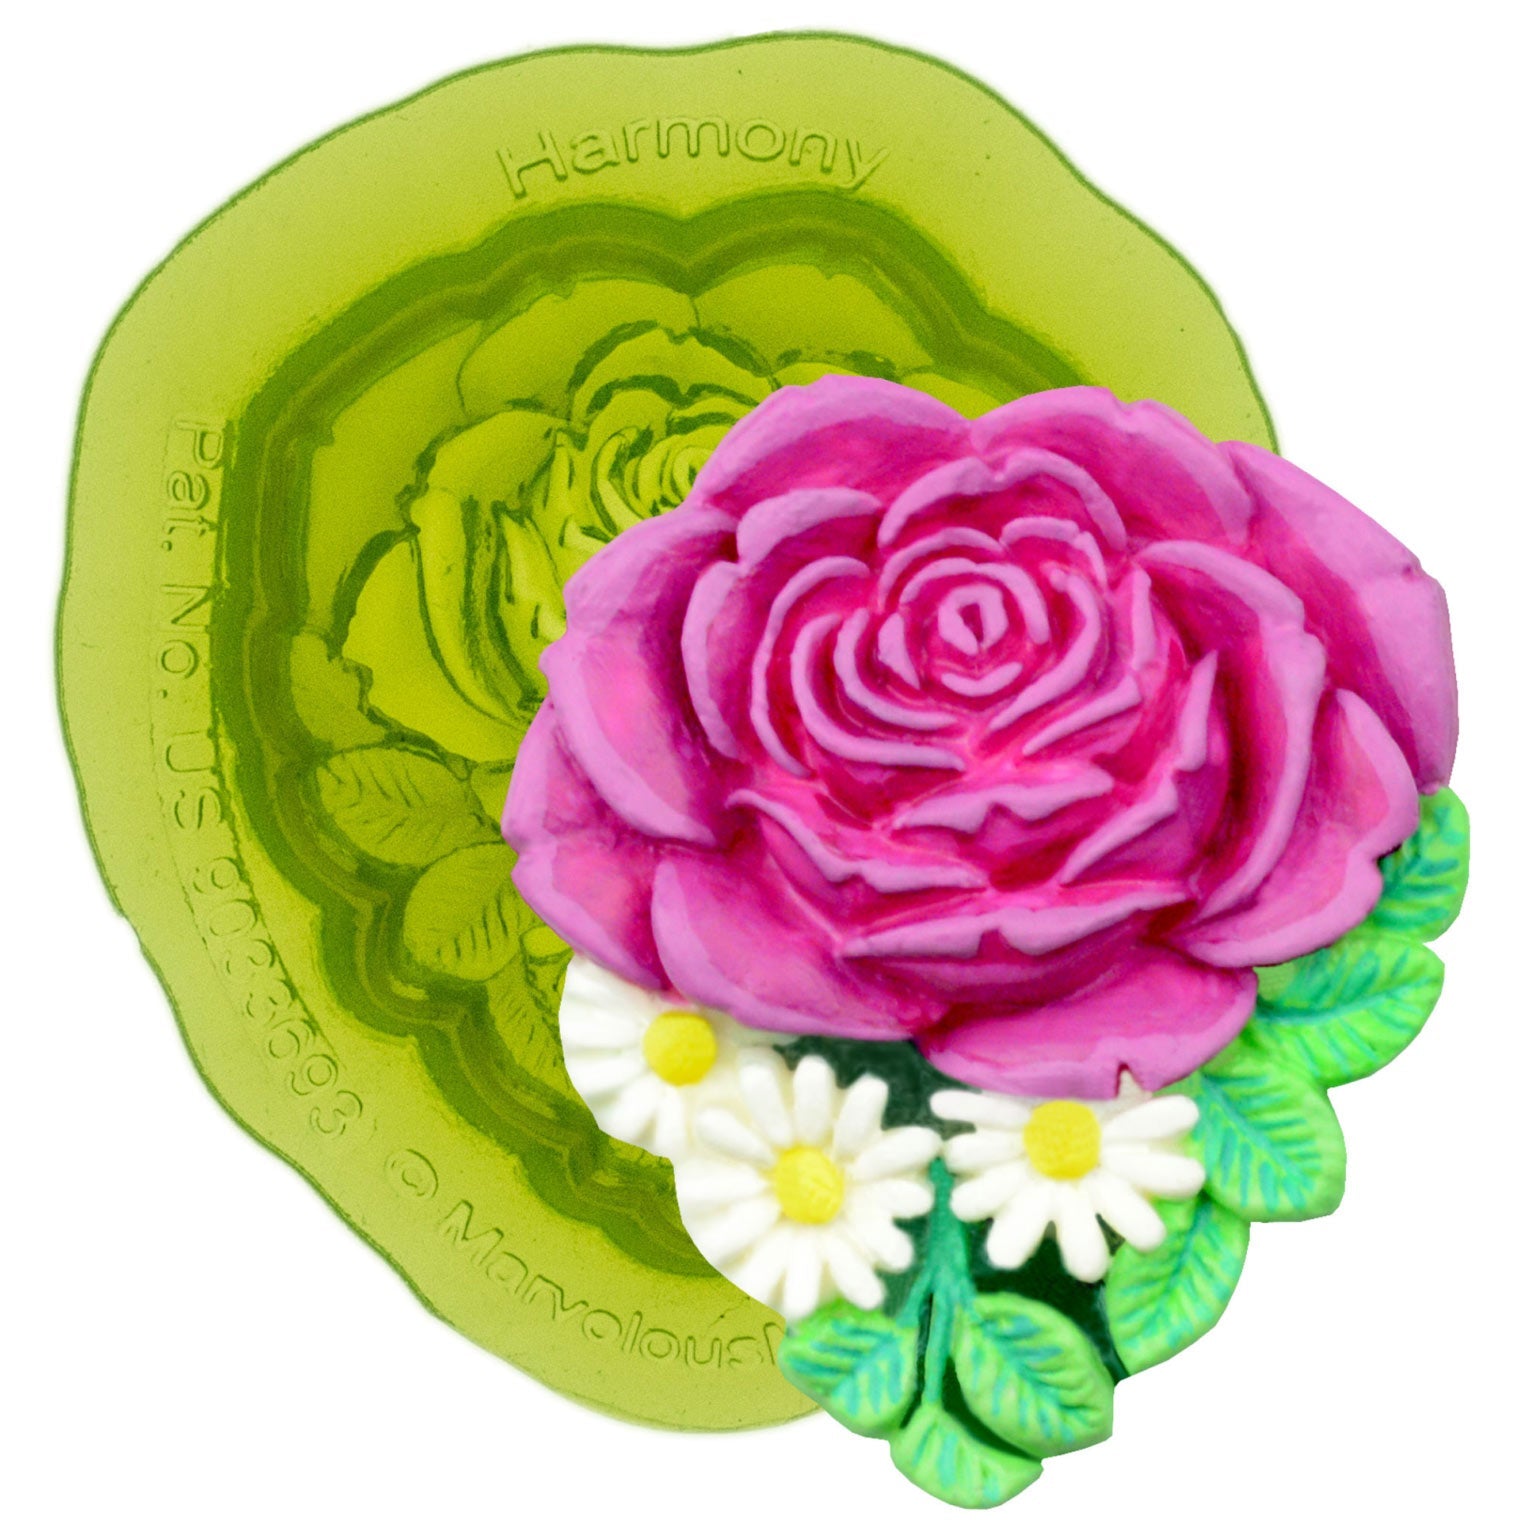 Harmony Floral Silicone Mold for Cake Decorating and DIY Crafts